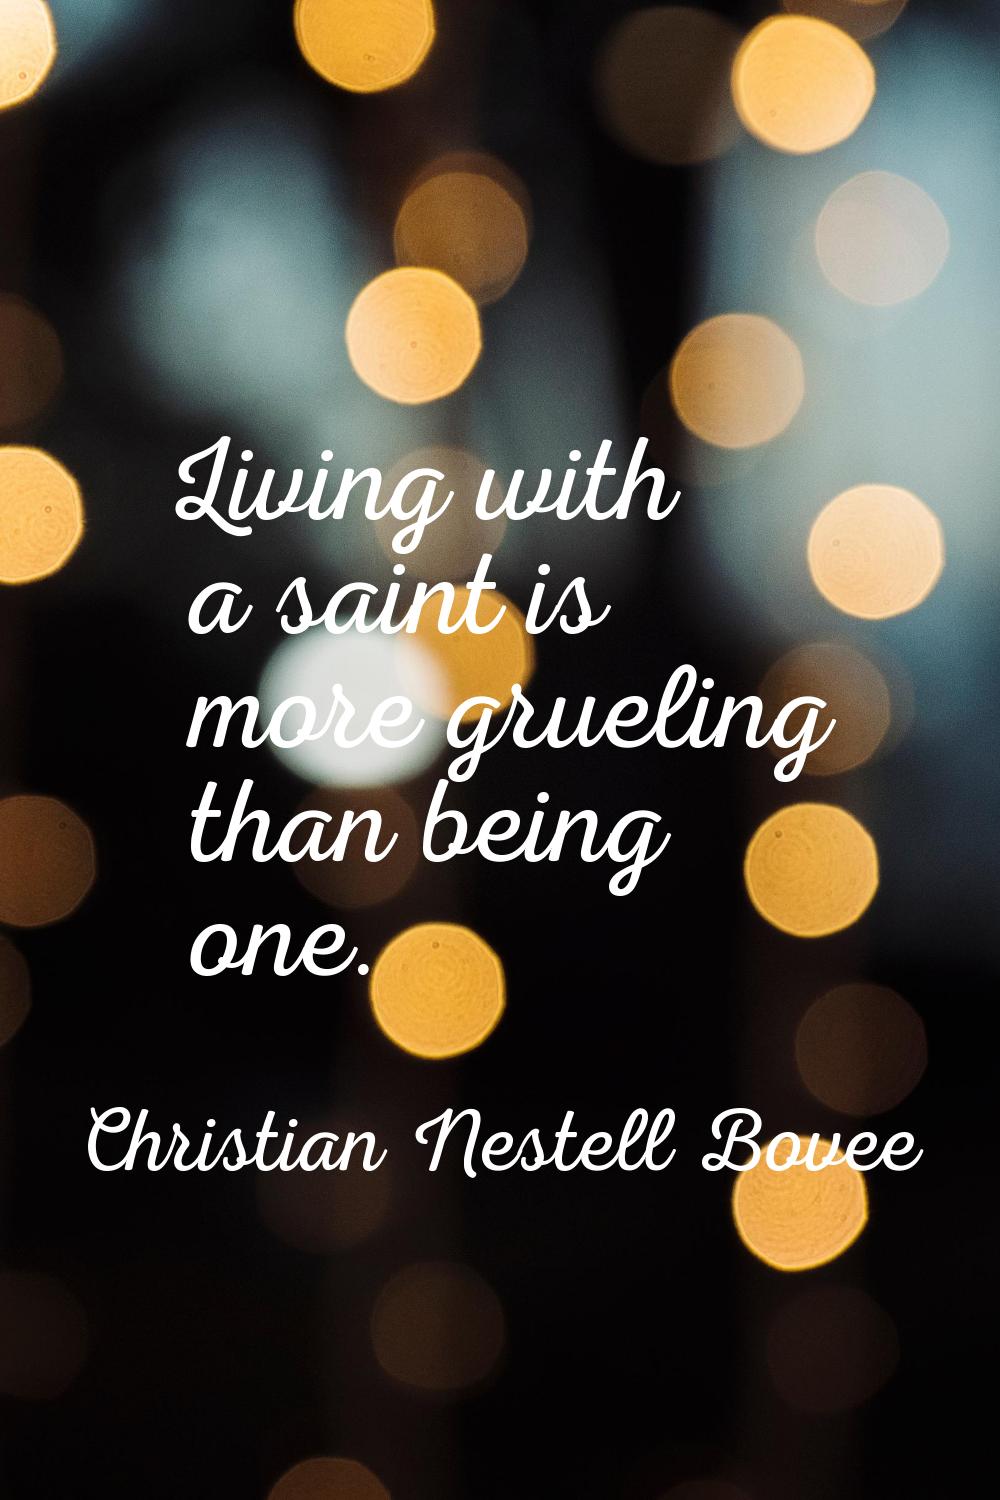 Living with a saint is more grueling than being one.